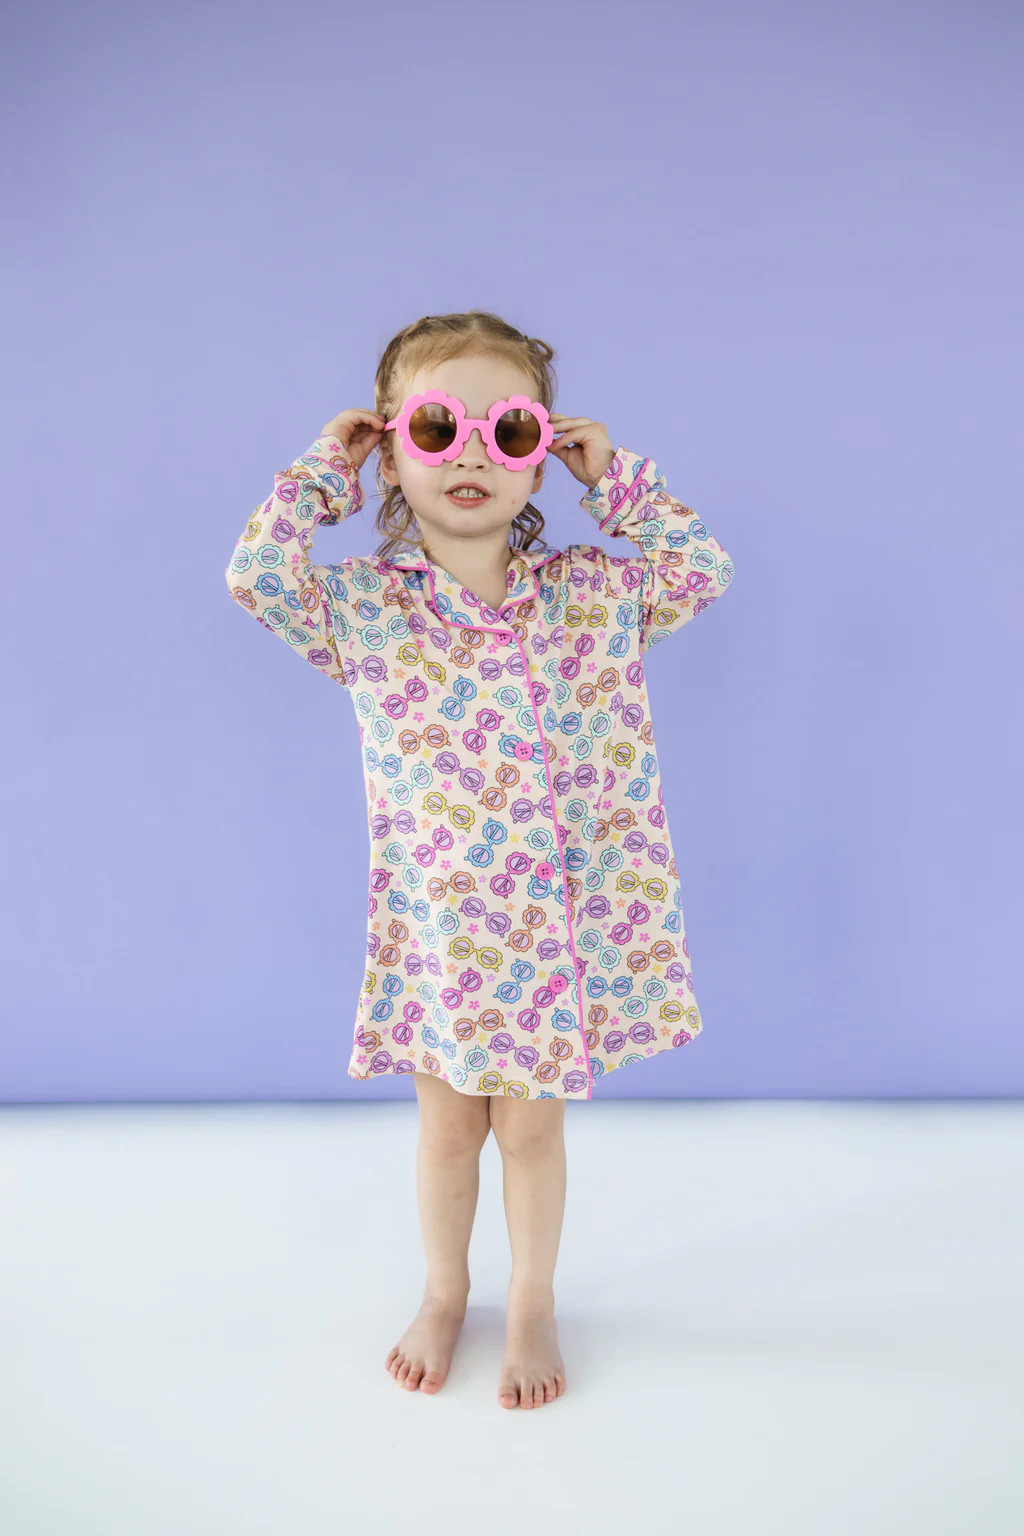 RAY OF SUNSHINE GIRL'S DREAM GOWN | DREAM BIG LITTLE CO